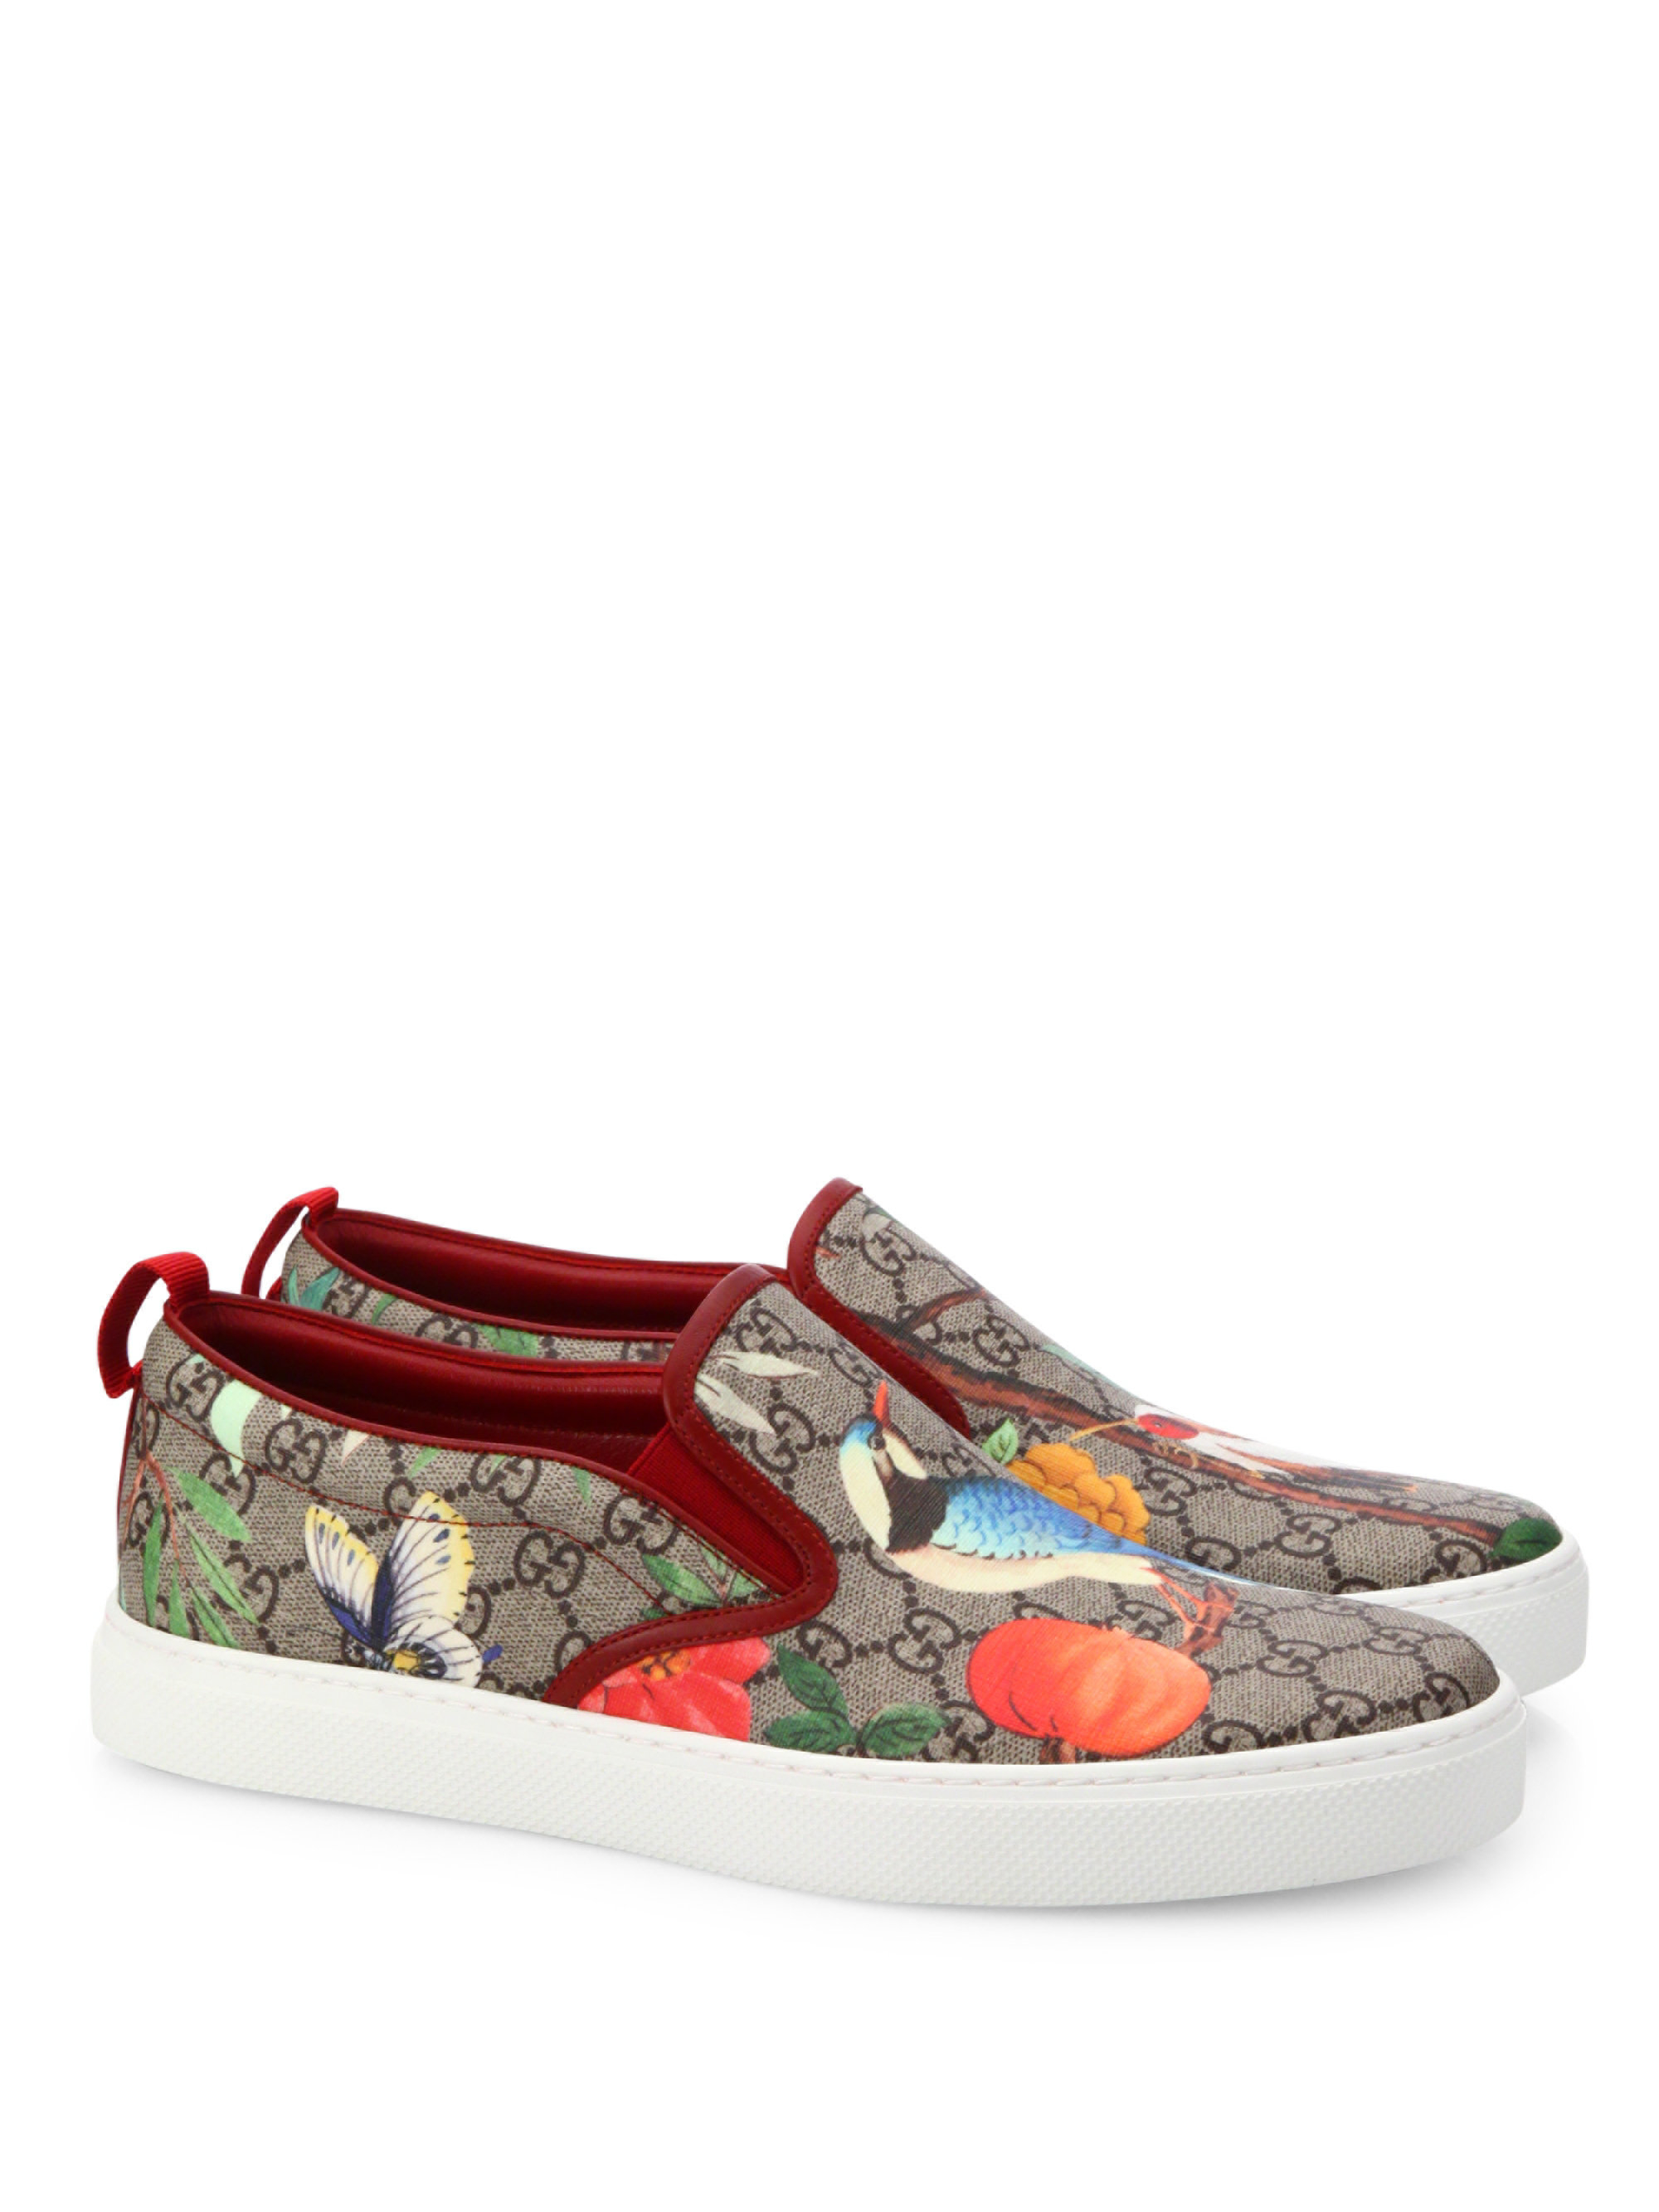 Gucci Gg Supreme Tian Print Slip-on Sneakers in Gray | Lyst